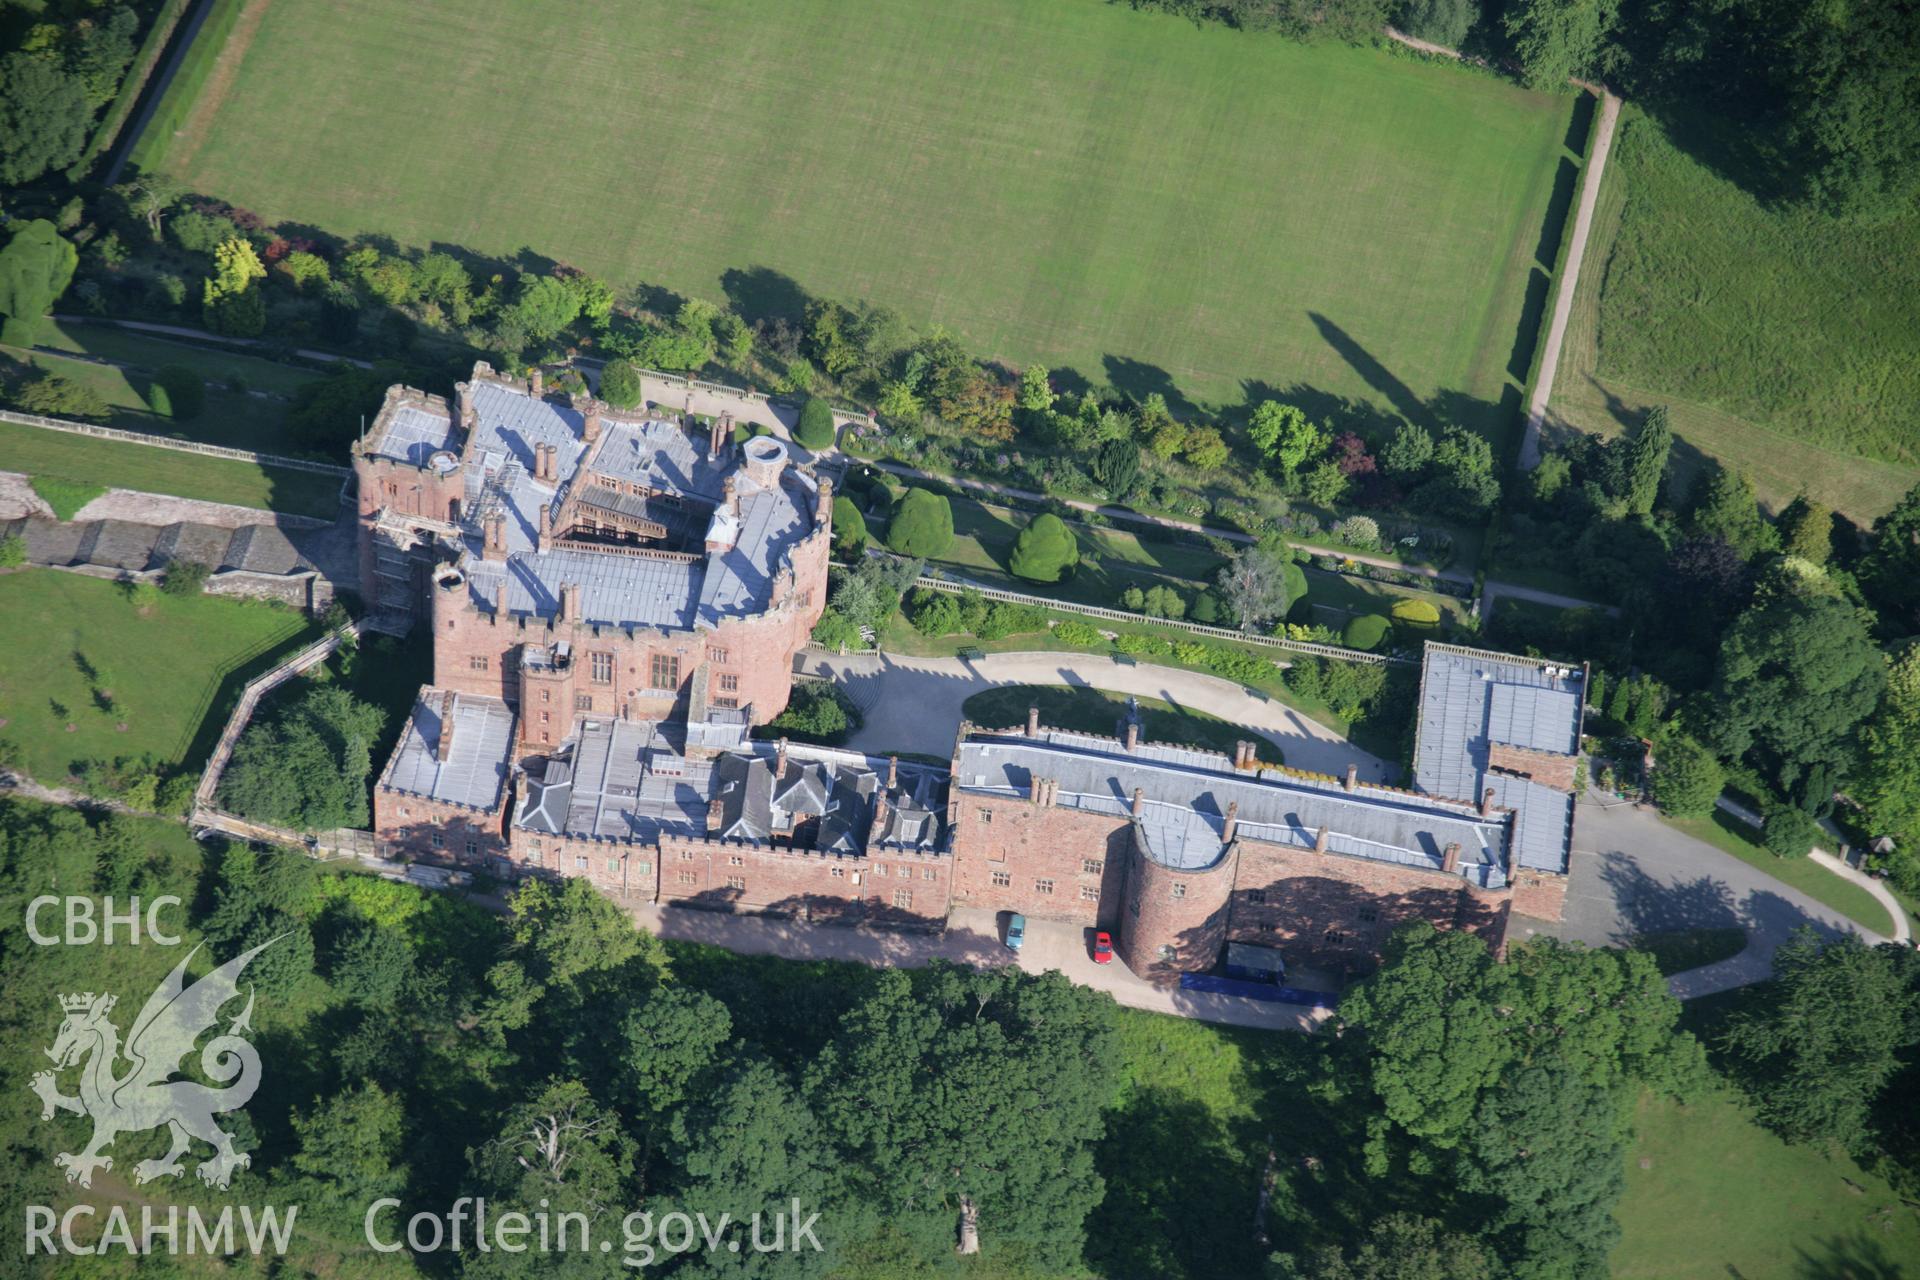 RCAHMW colour oblique aerial photograph of Powis Castle. Taken on 17 July 2006 by Toby Driver.